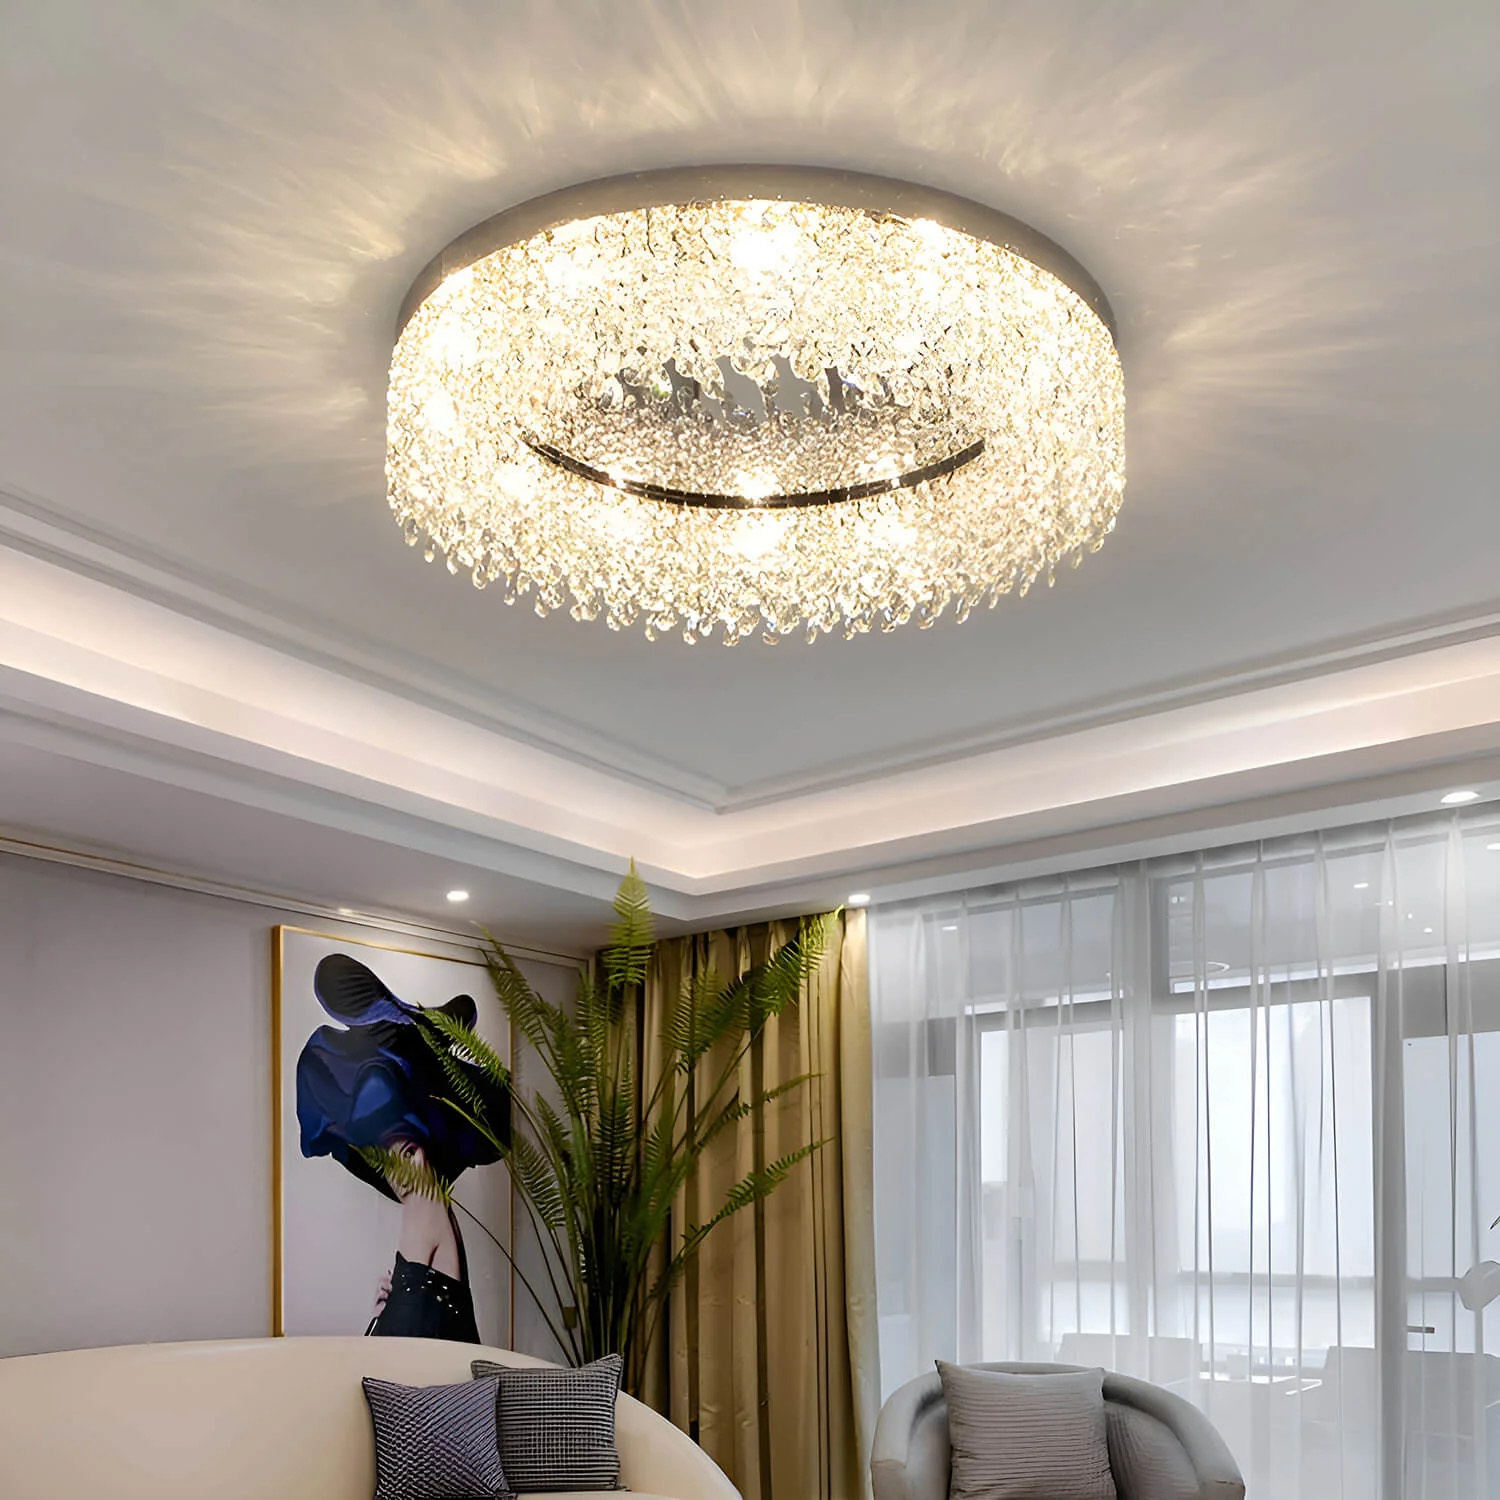 Lighting Fixture Installation - Logo Electrical Services